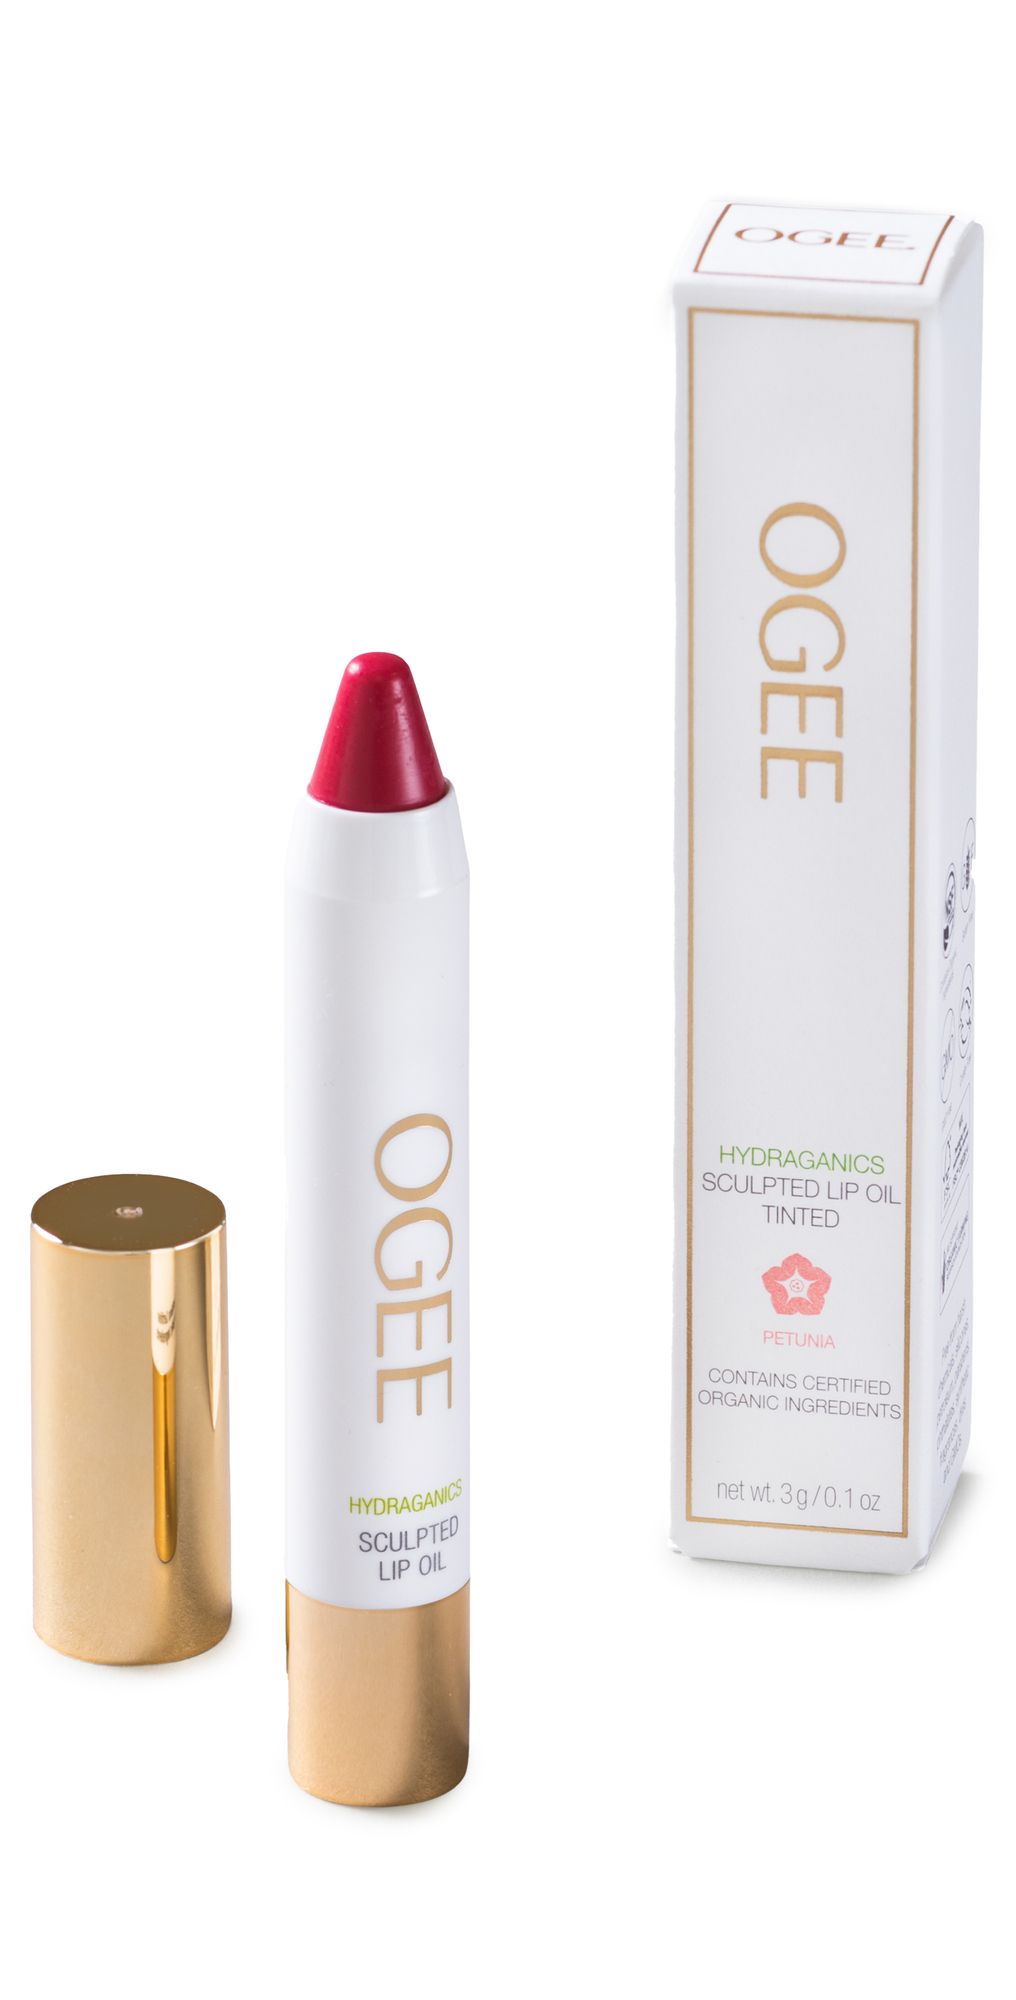 Ogee Tinted Sculpted Lip Oils | Shopbop